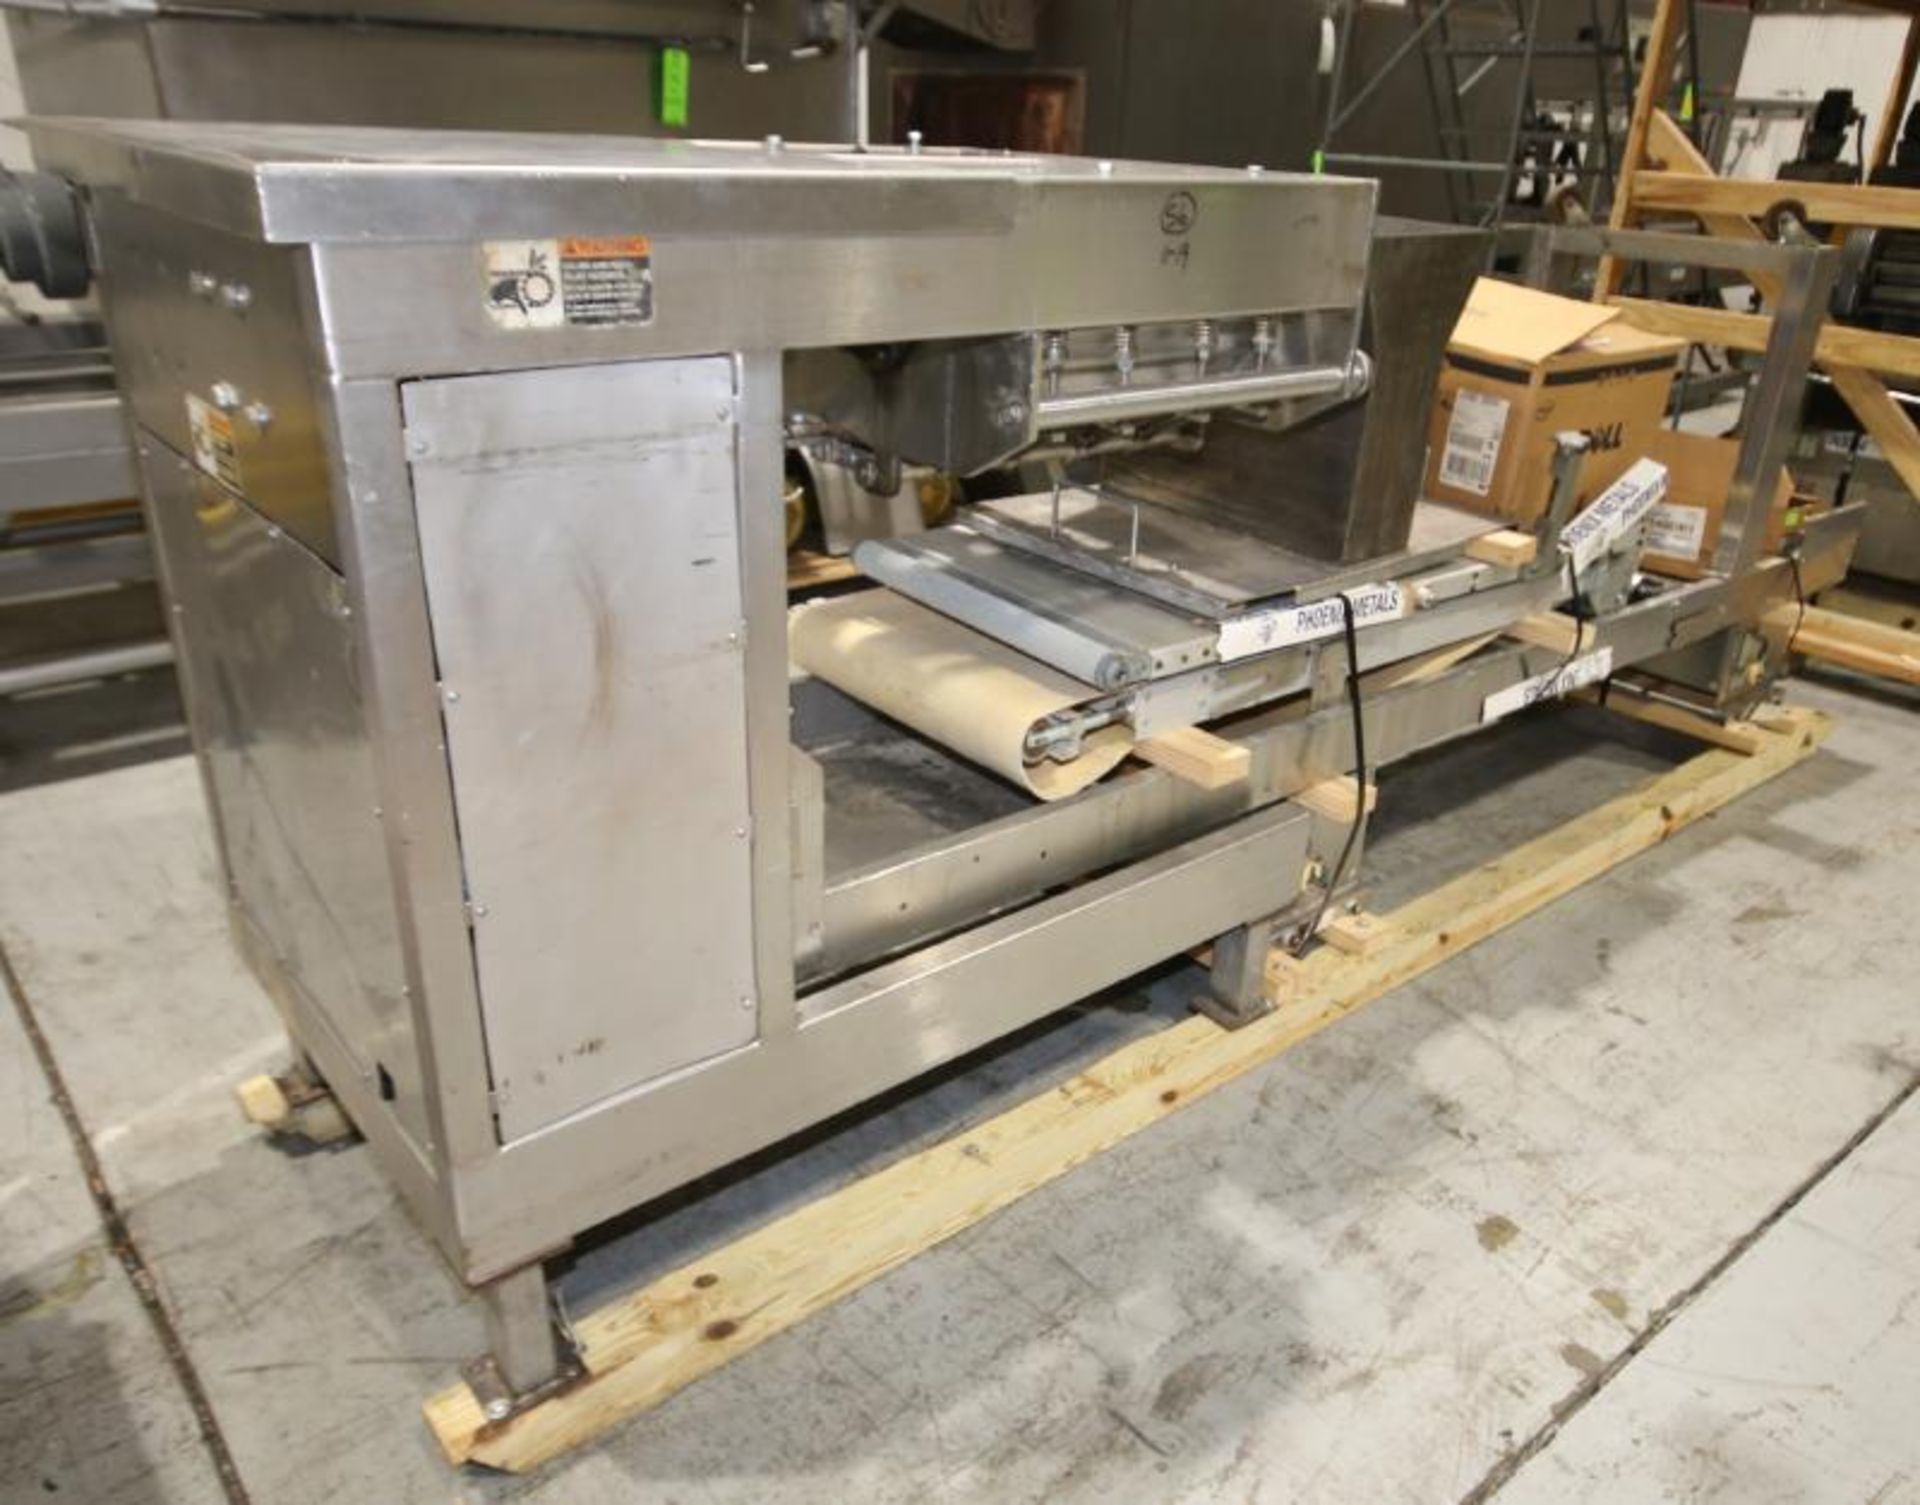 Moline 22" W S/S Extruder with 3 pcs Conveyor Sections Includes 10 ft, 5 ft 8" & 57" L x 22" W - Image 6 of 6